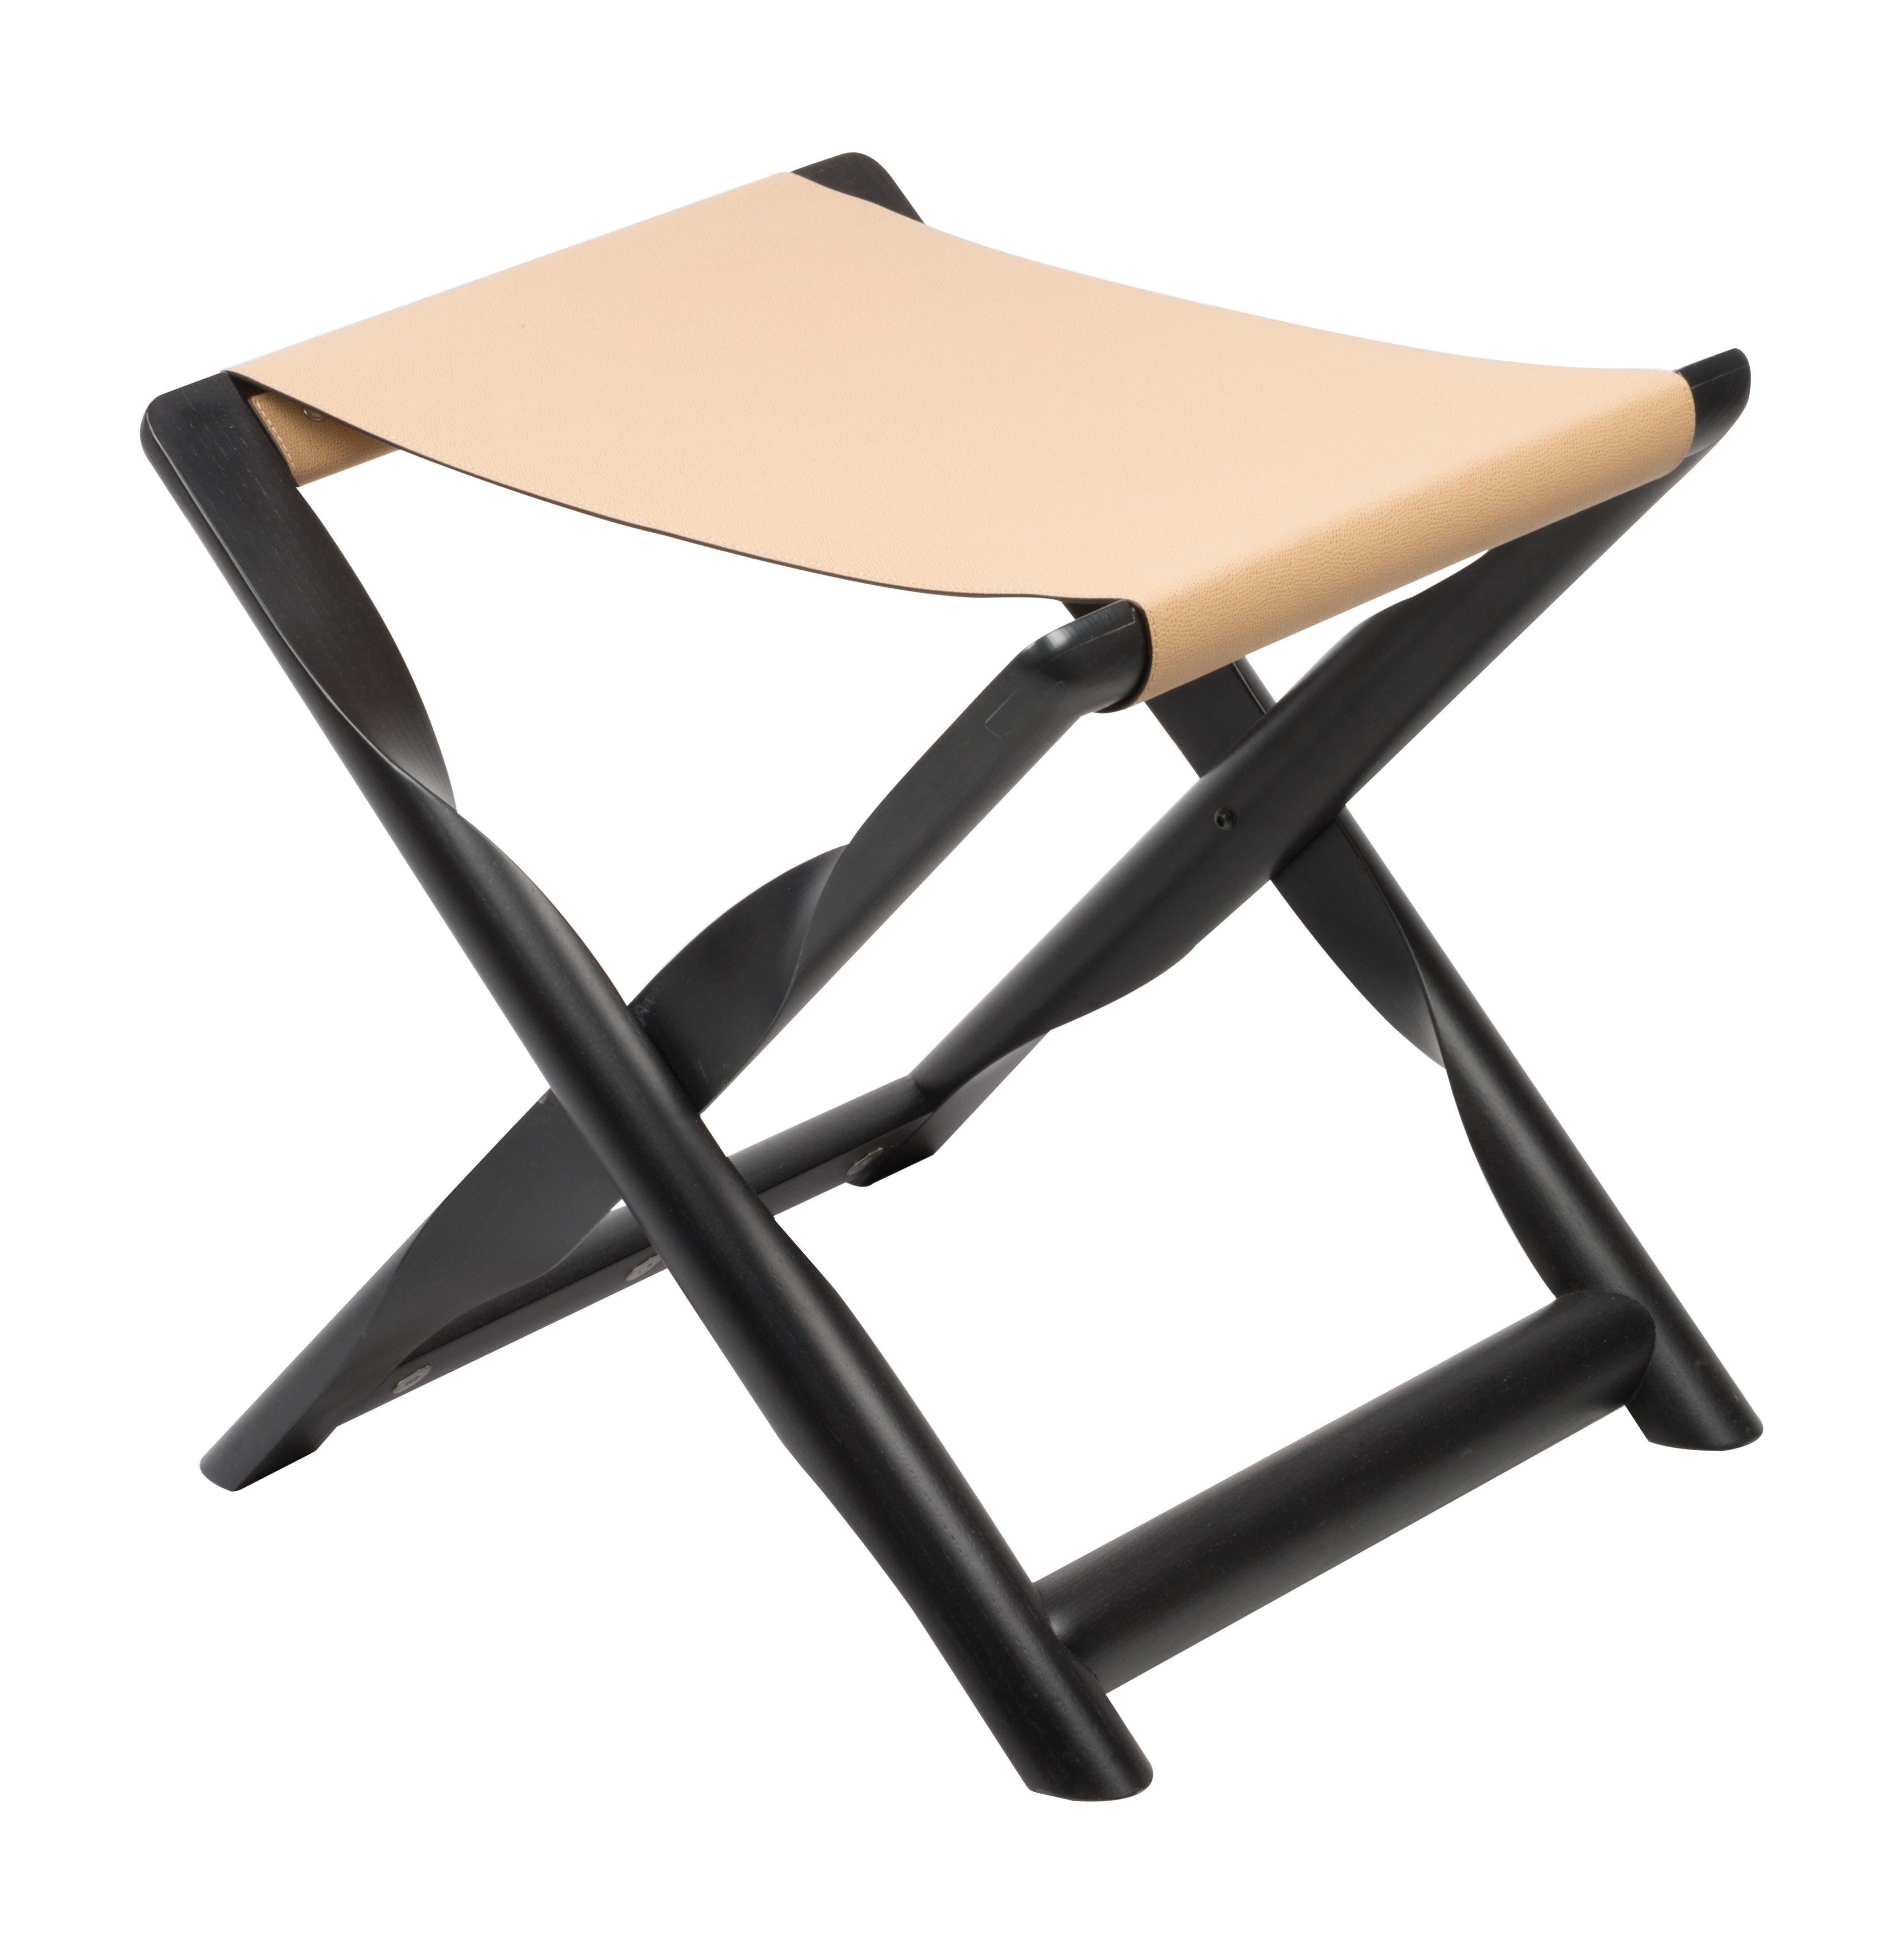 Contemporary Elica Folding Stool / Luggage Rack by Gio Bagnara For Sale